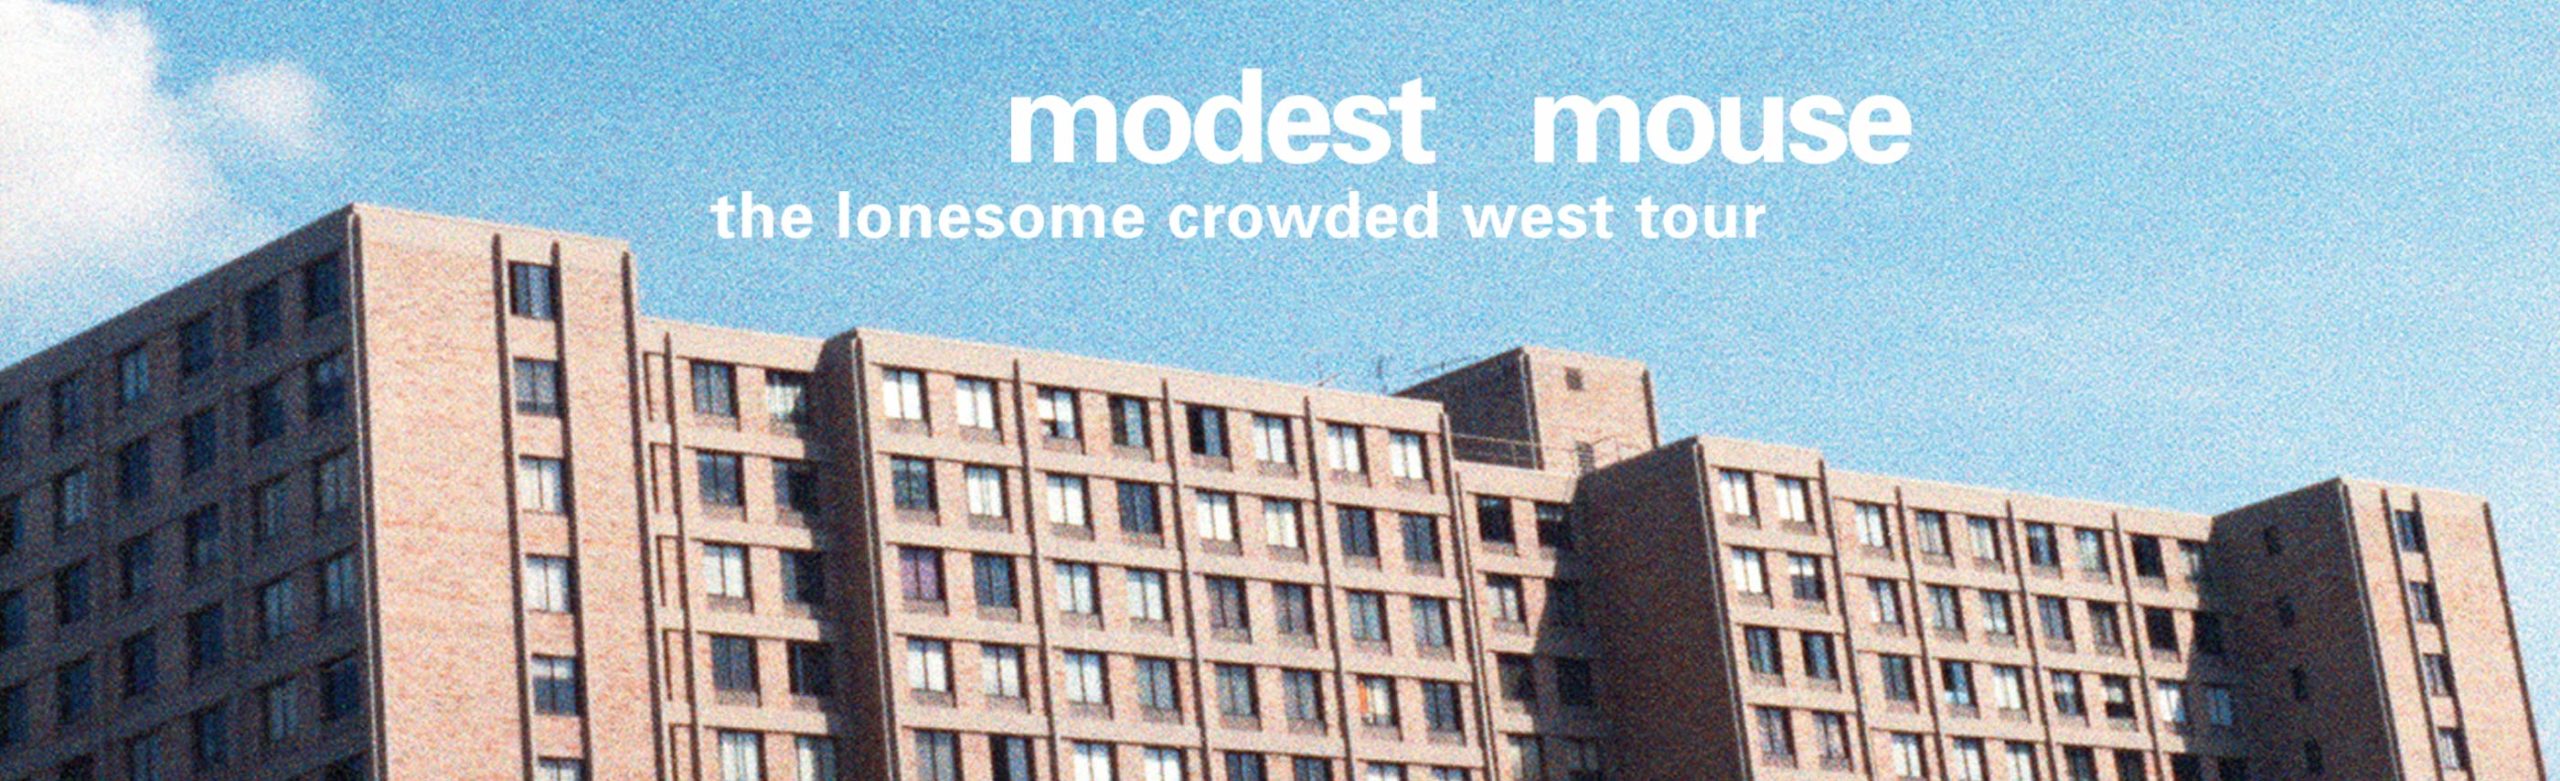 Modest Mouse Announces “The Lonesome Crowded West” Tour Opener in Missoula Image